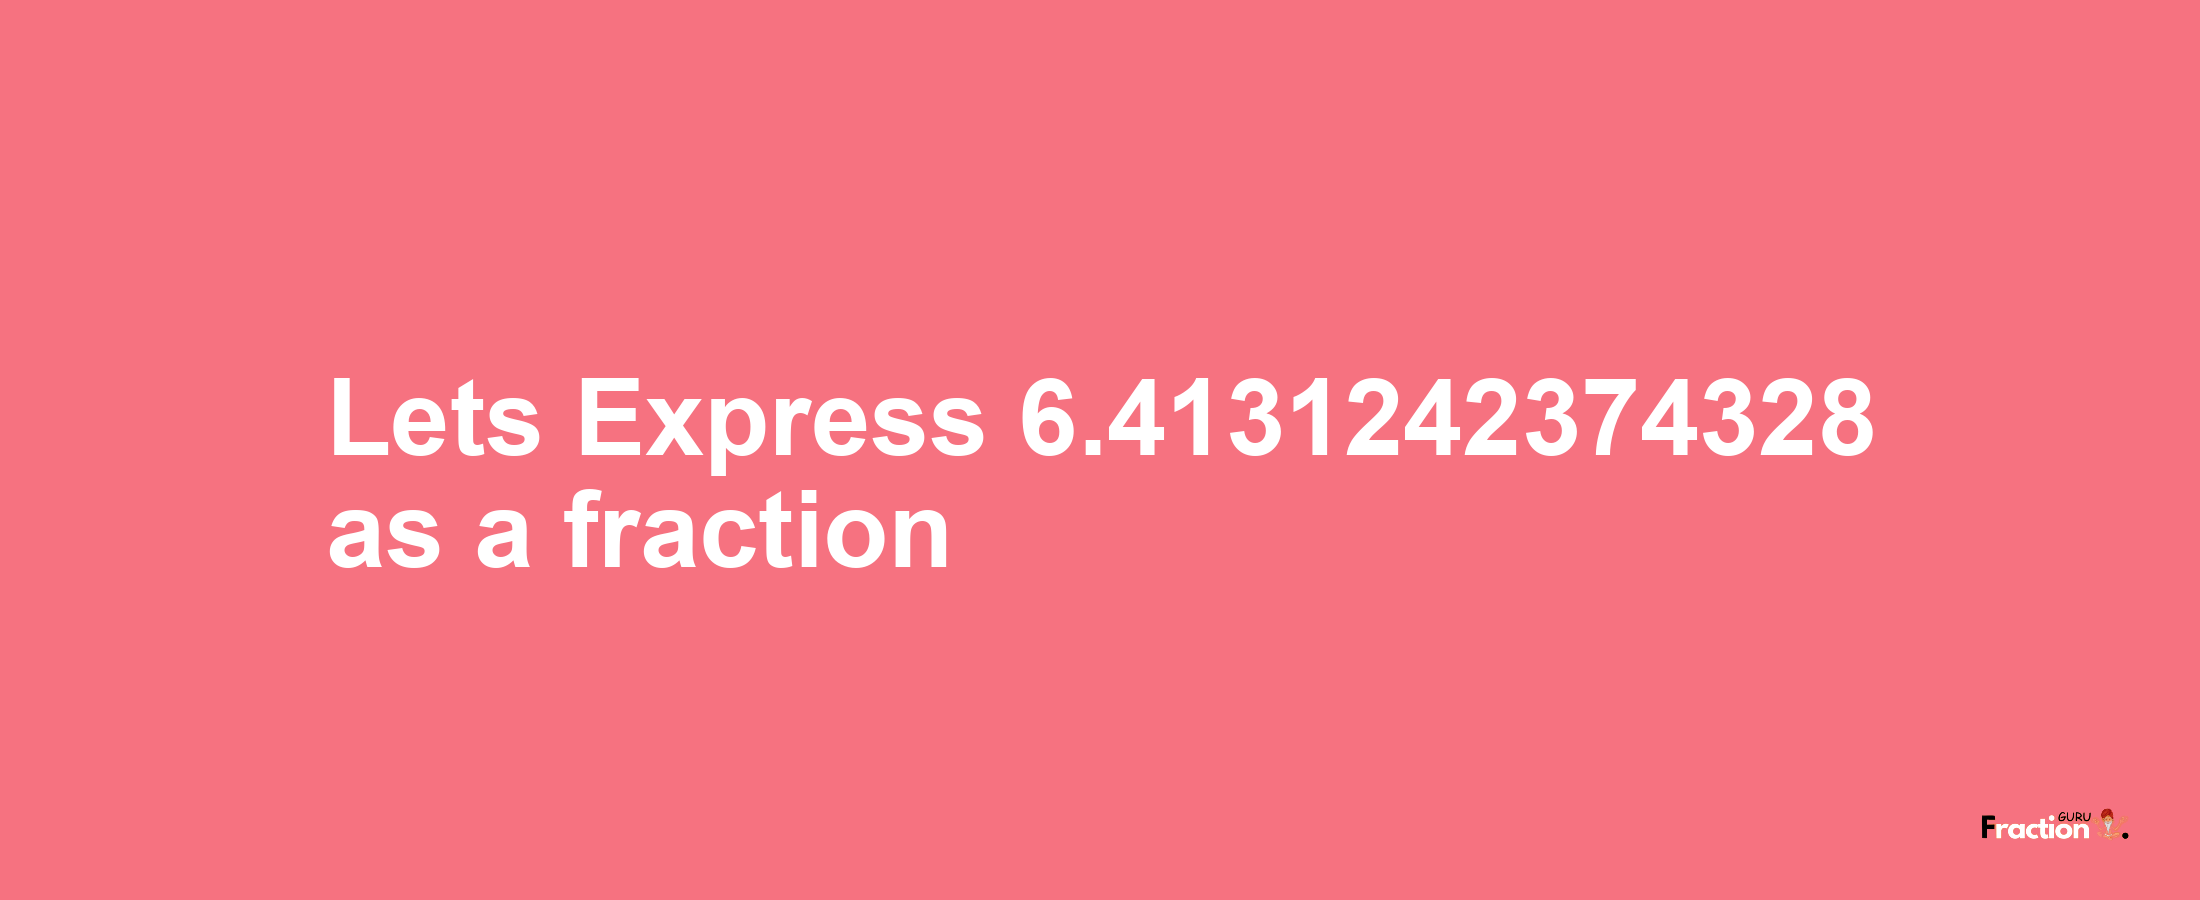 Lets Express 6.4131242374328 as afraction